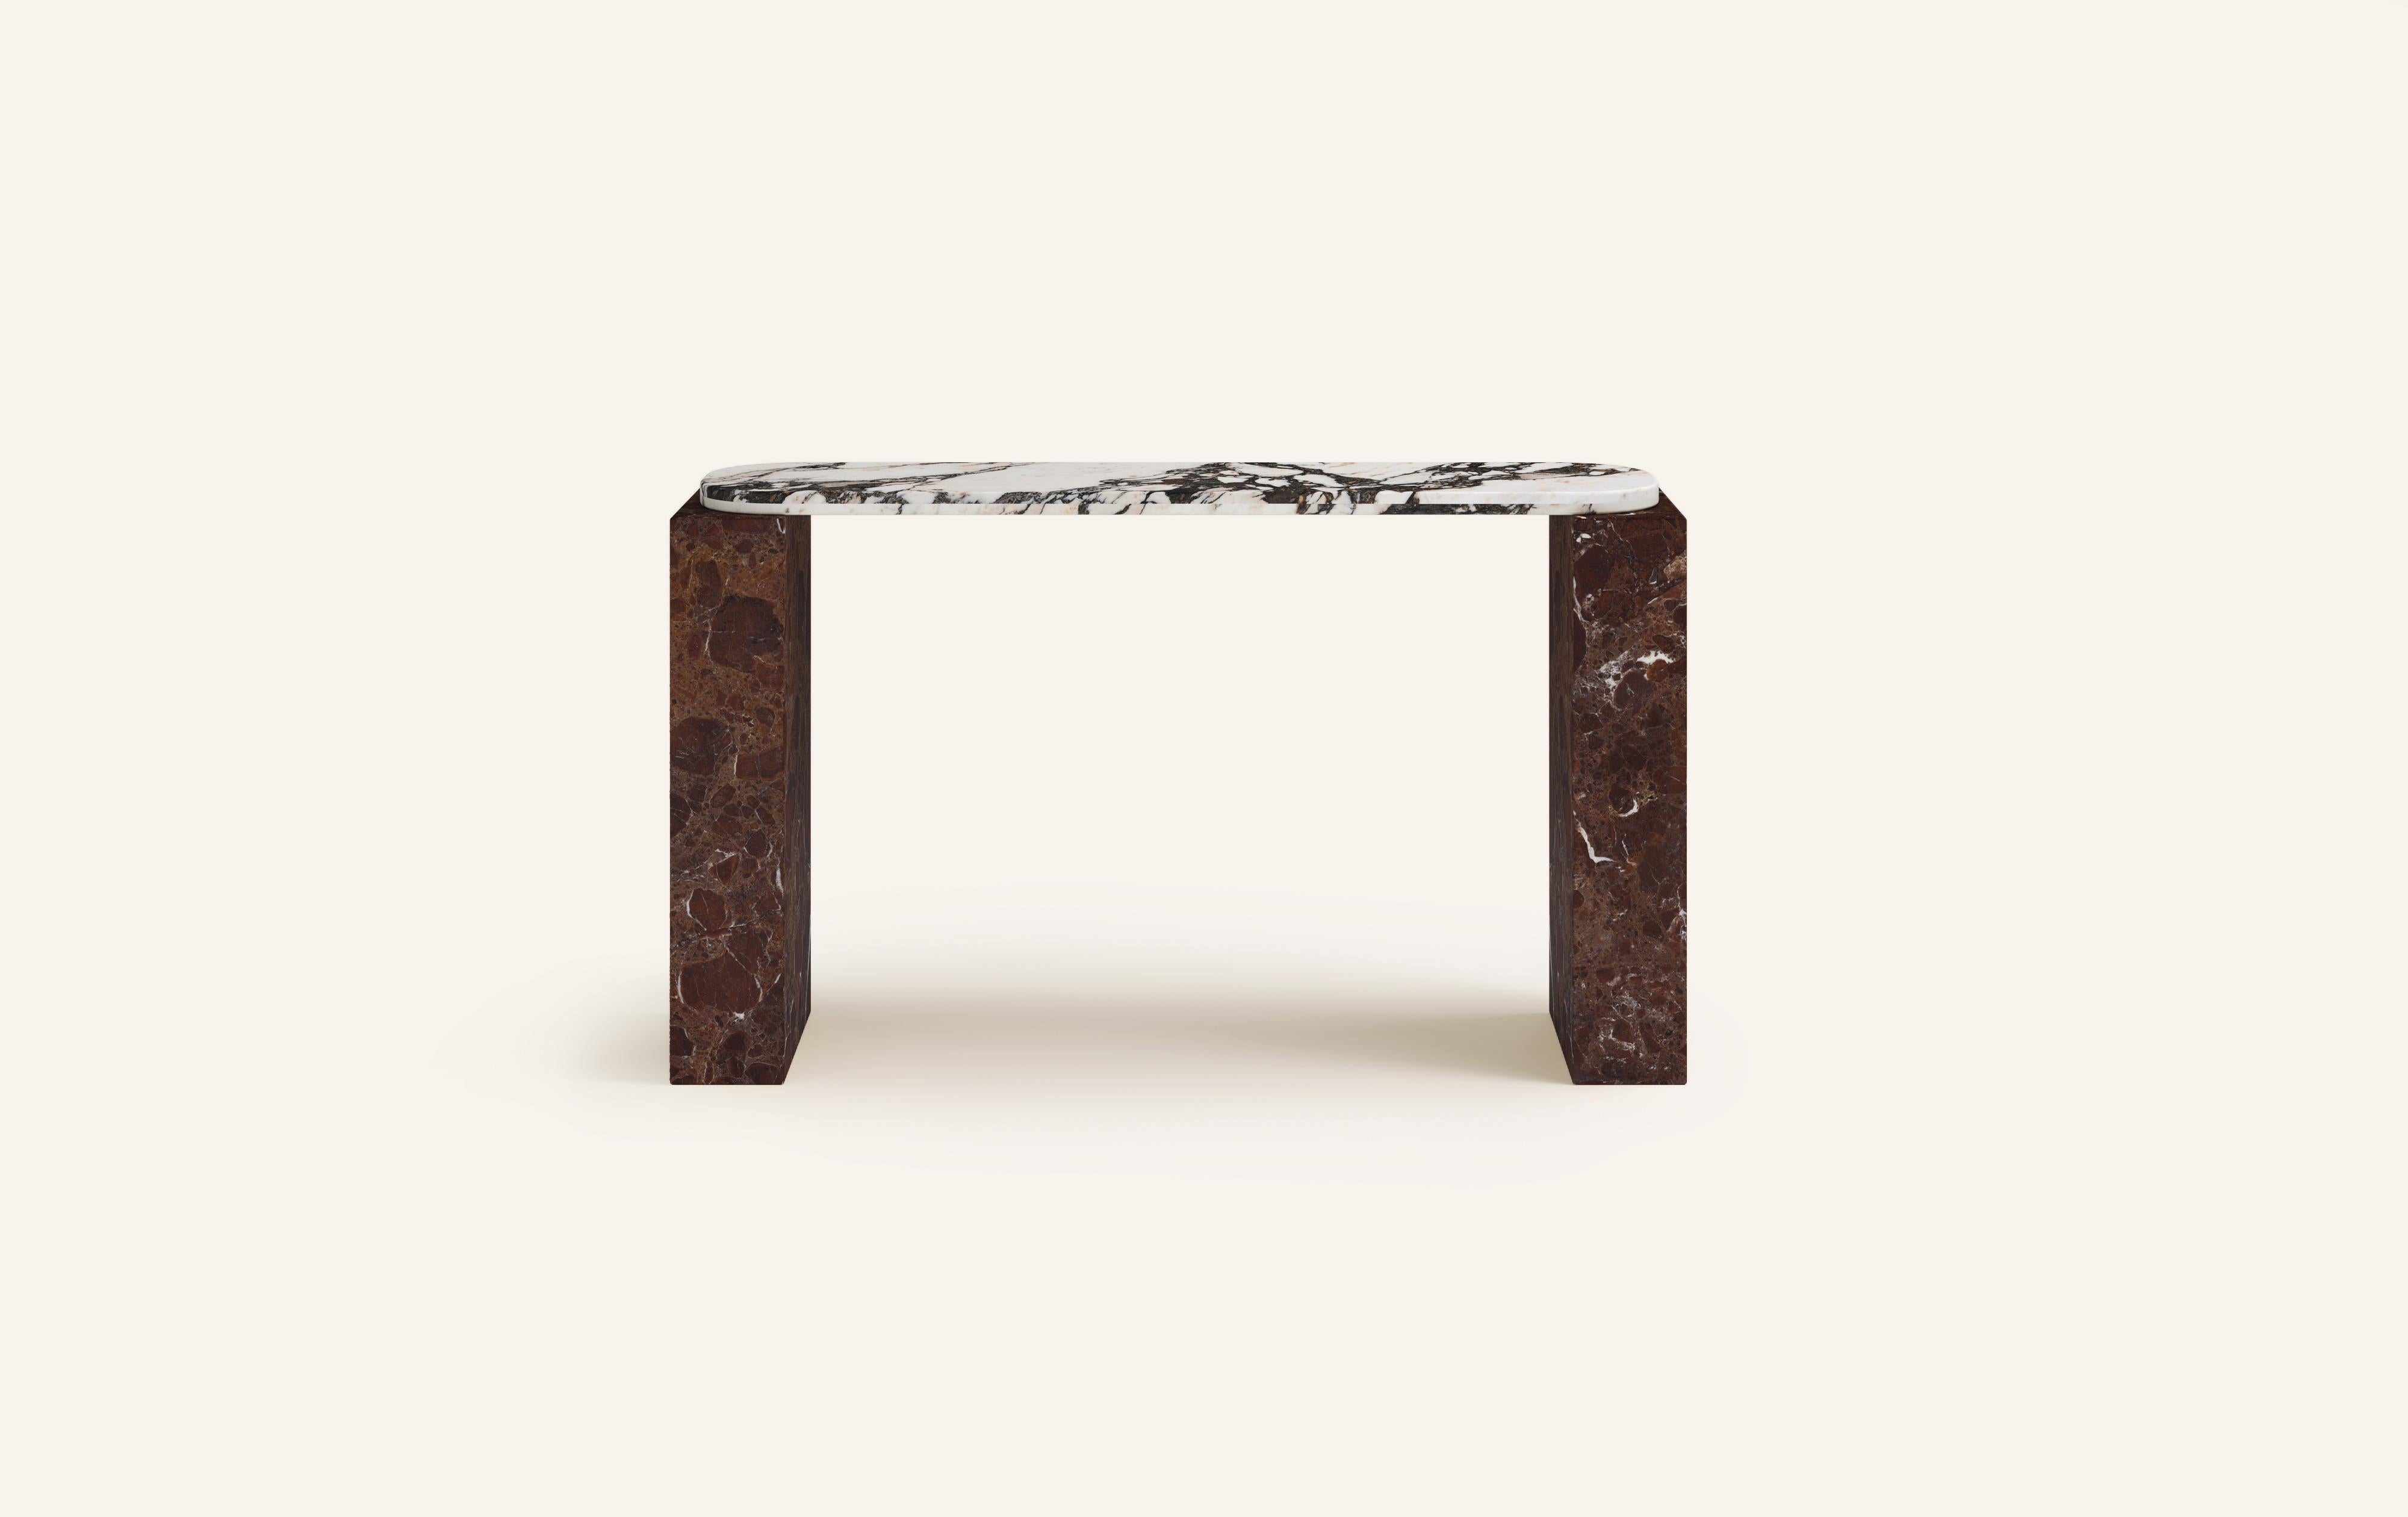 MONOLITHIC FORMS SOFTENED BY GENTLE EDGES. WITH ITS BOLD MARBLE PATTERNS CUBO IS AS VERSATILE AS IT IS STRIKING.

DIMENSIONS:
74”L x 17”W x 36”H: 
- 72”L x 15”W x 1.5” THICK TABLETOP WITH WITH 6